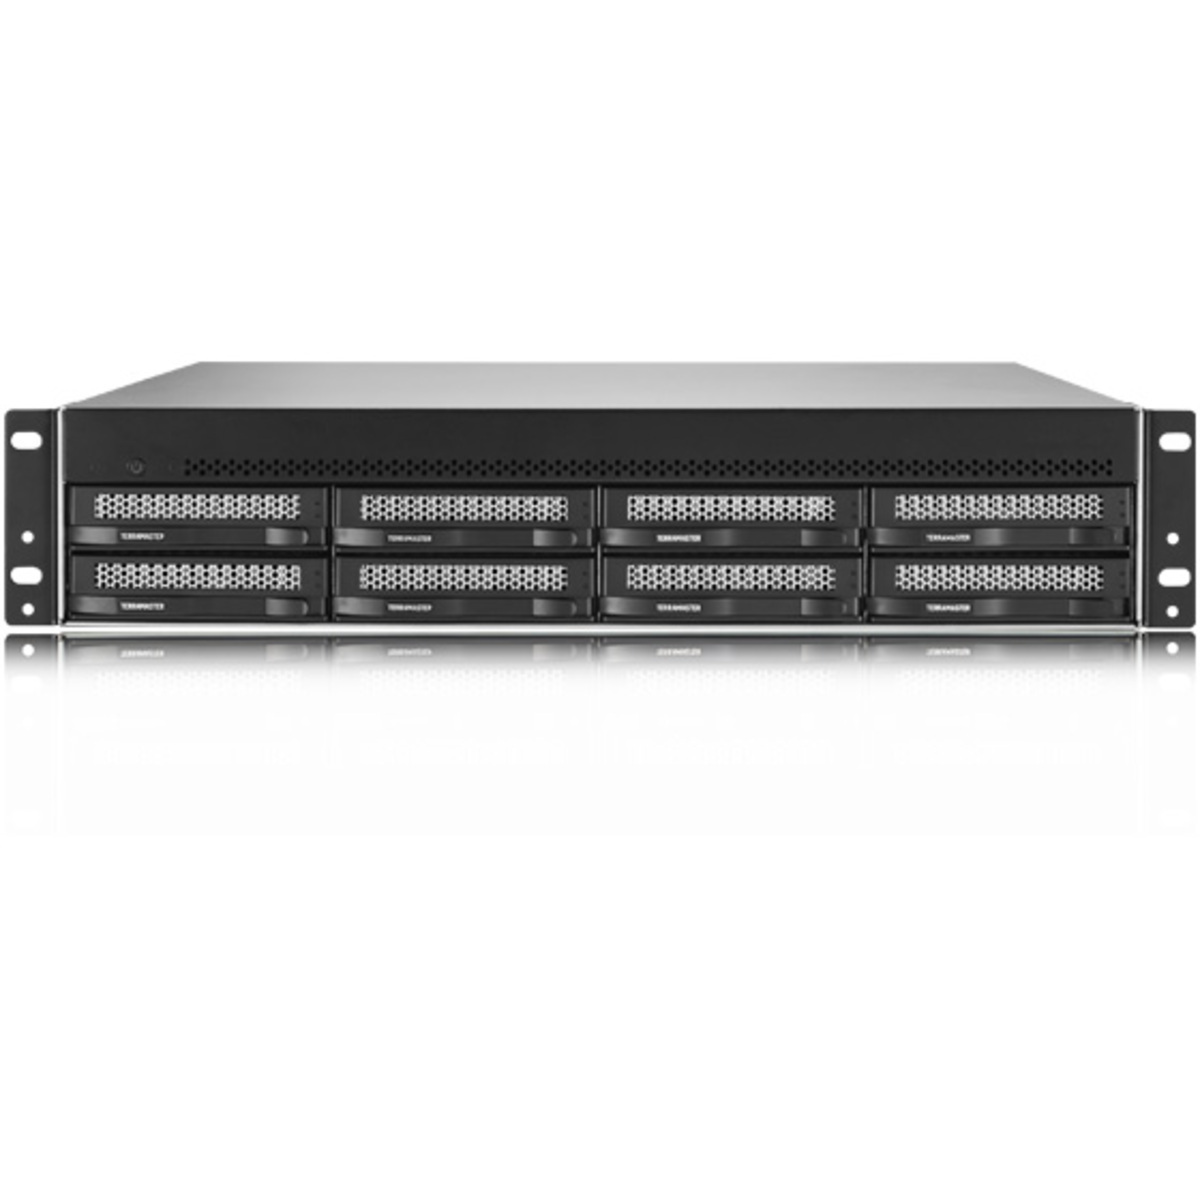 TerraMaster U8-450 80tb 8-Bay RackMount Multimedia / Power User / Business NAS - Network Attached Storage Device 8x10tb Seagate IronWolf Pro ST10000NT001 3.5 7200rpm SATA 6Gb/s HDD NAS Class Drives Installed - Burn-In Tested - ON SALE U8-450